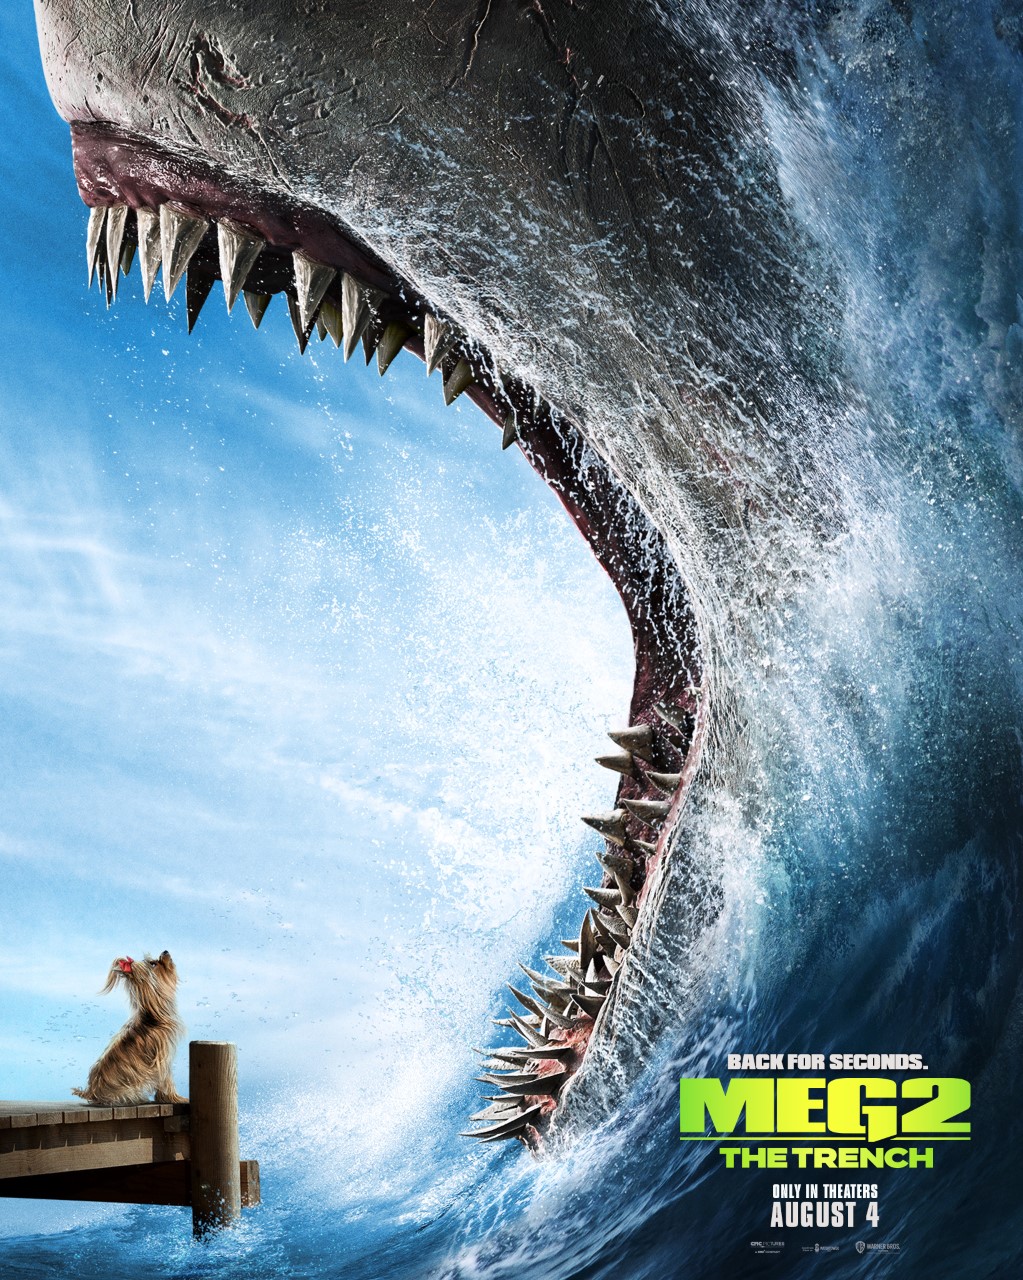 Meg 2: The Trench one-sheet